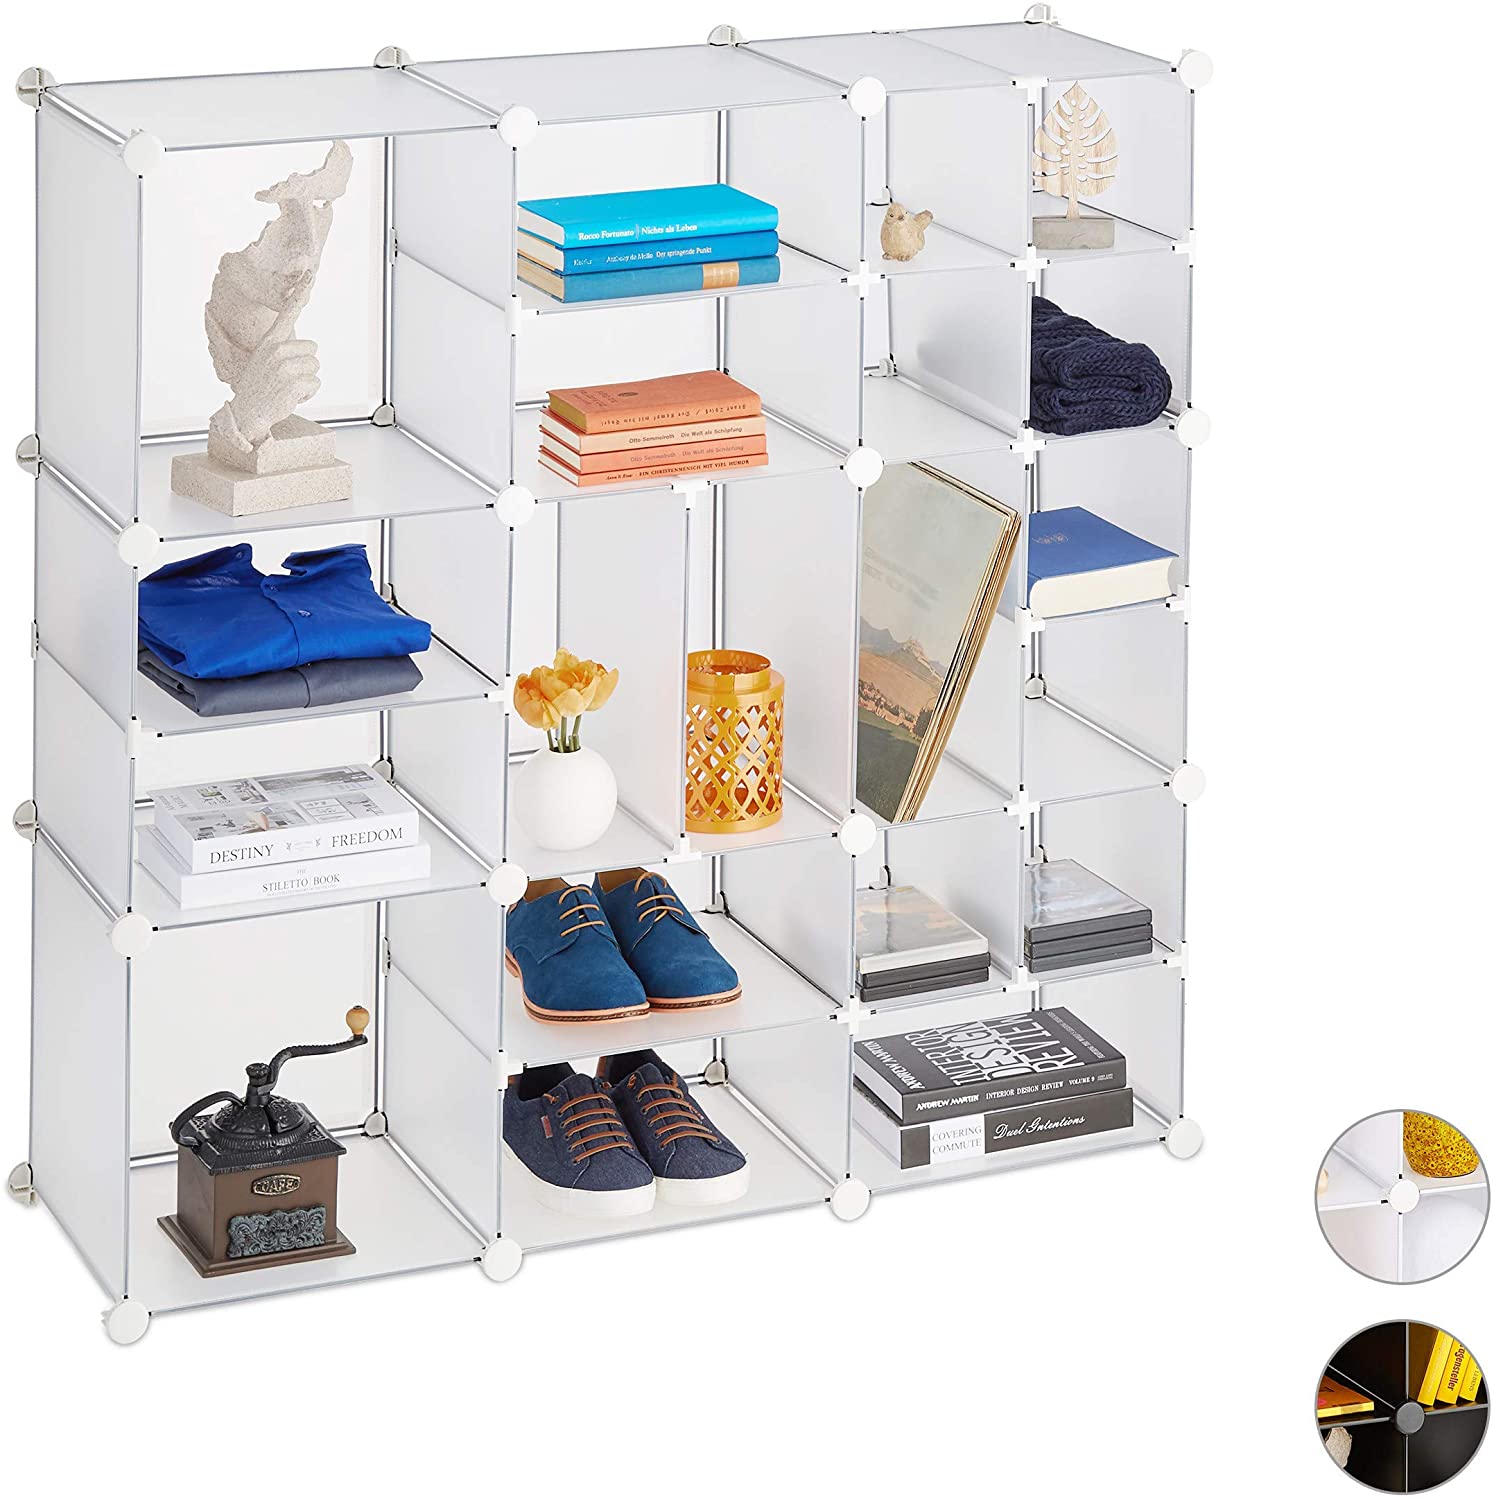 Relaxdays Shelf System 20 Compartments Large Open Diy Shelving Plastic Room